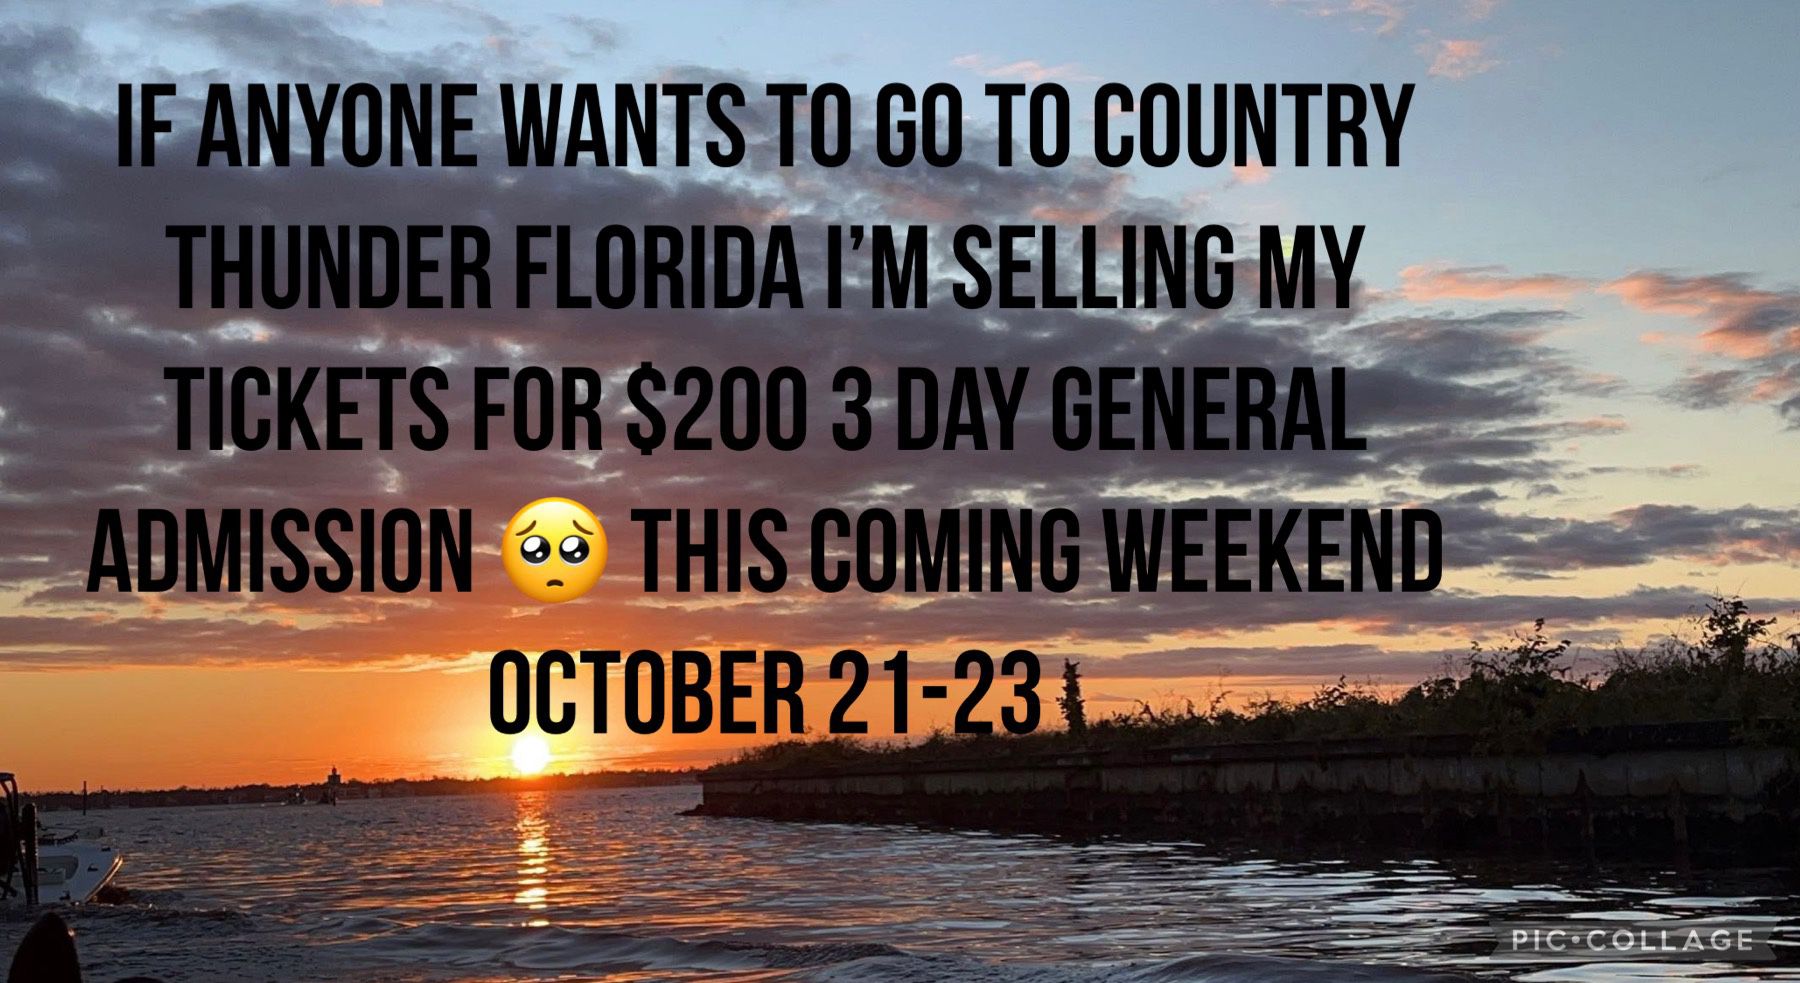 Country Thunder Tickets Oct 21-23 2022